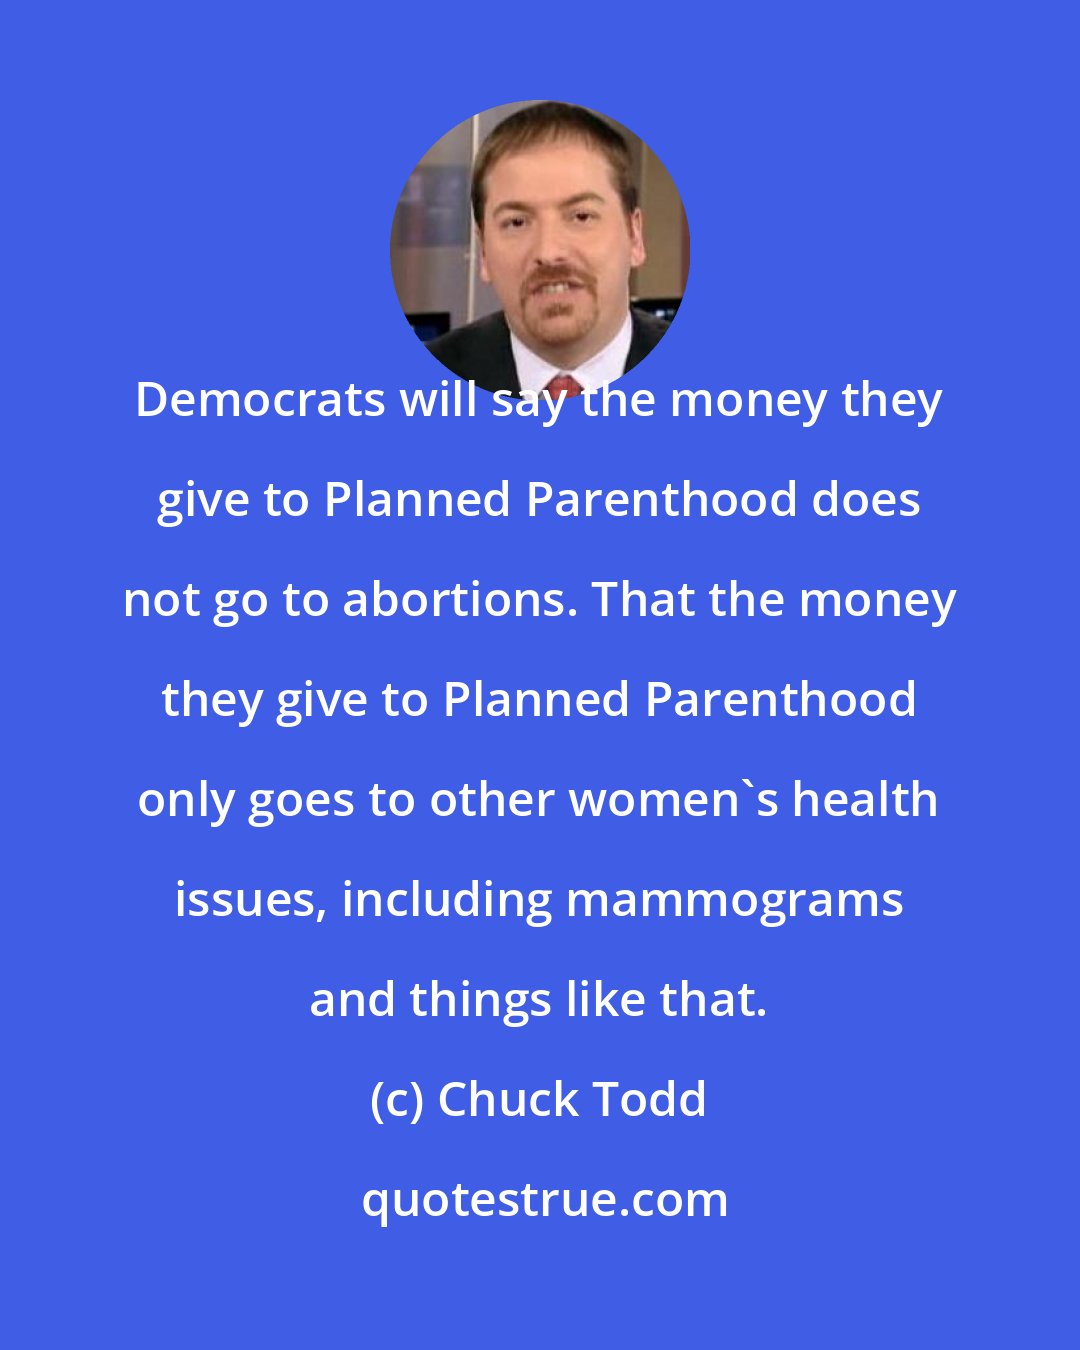 Chuck Todd: Democrats will say the money they give to Planned Parenthood does not go to abortions. That the money they give to Planned Parenthood only goes to other women's health issues, including mammograms and things like that.